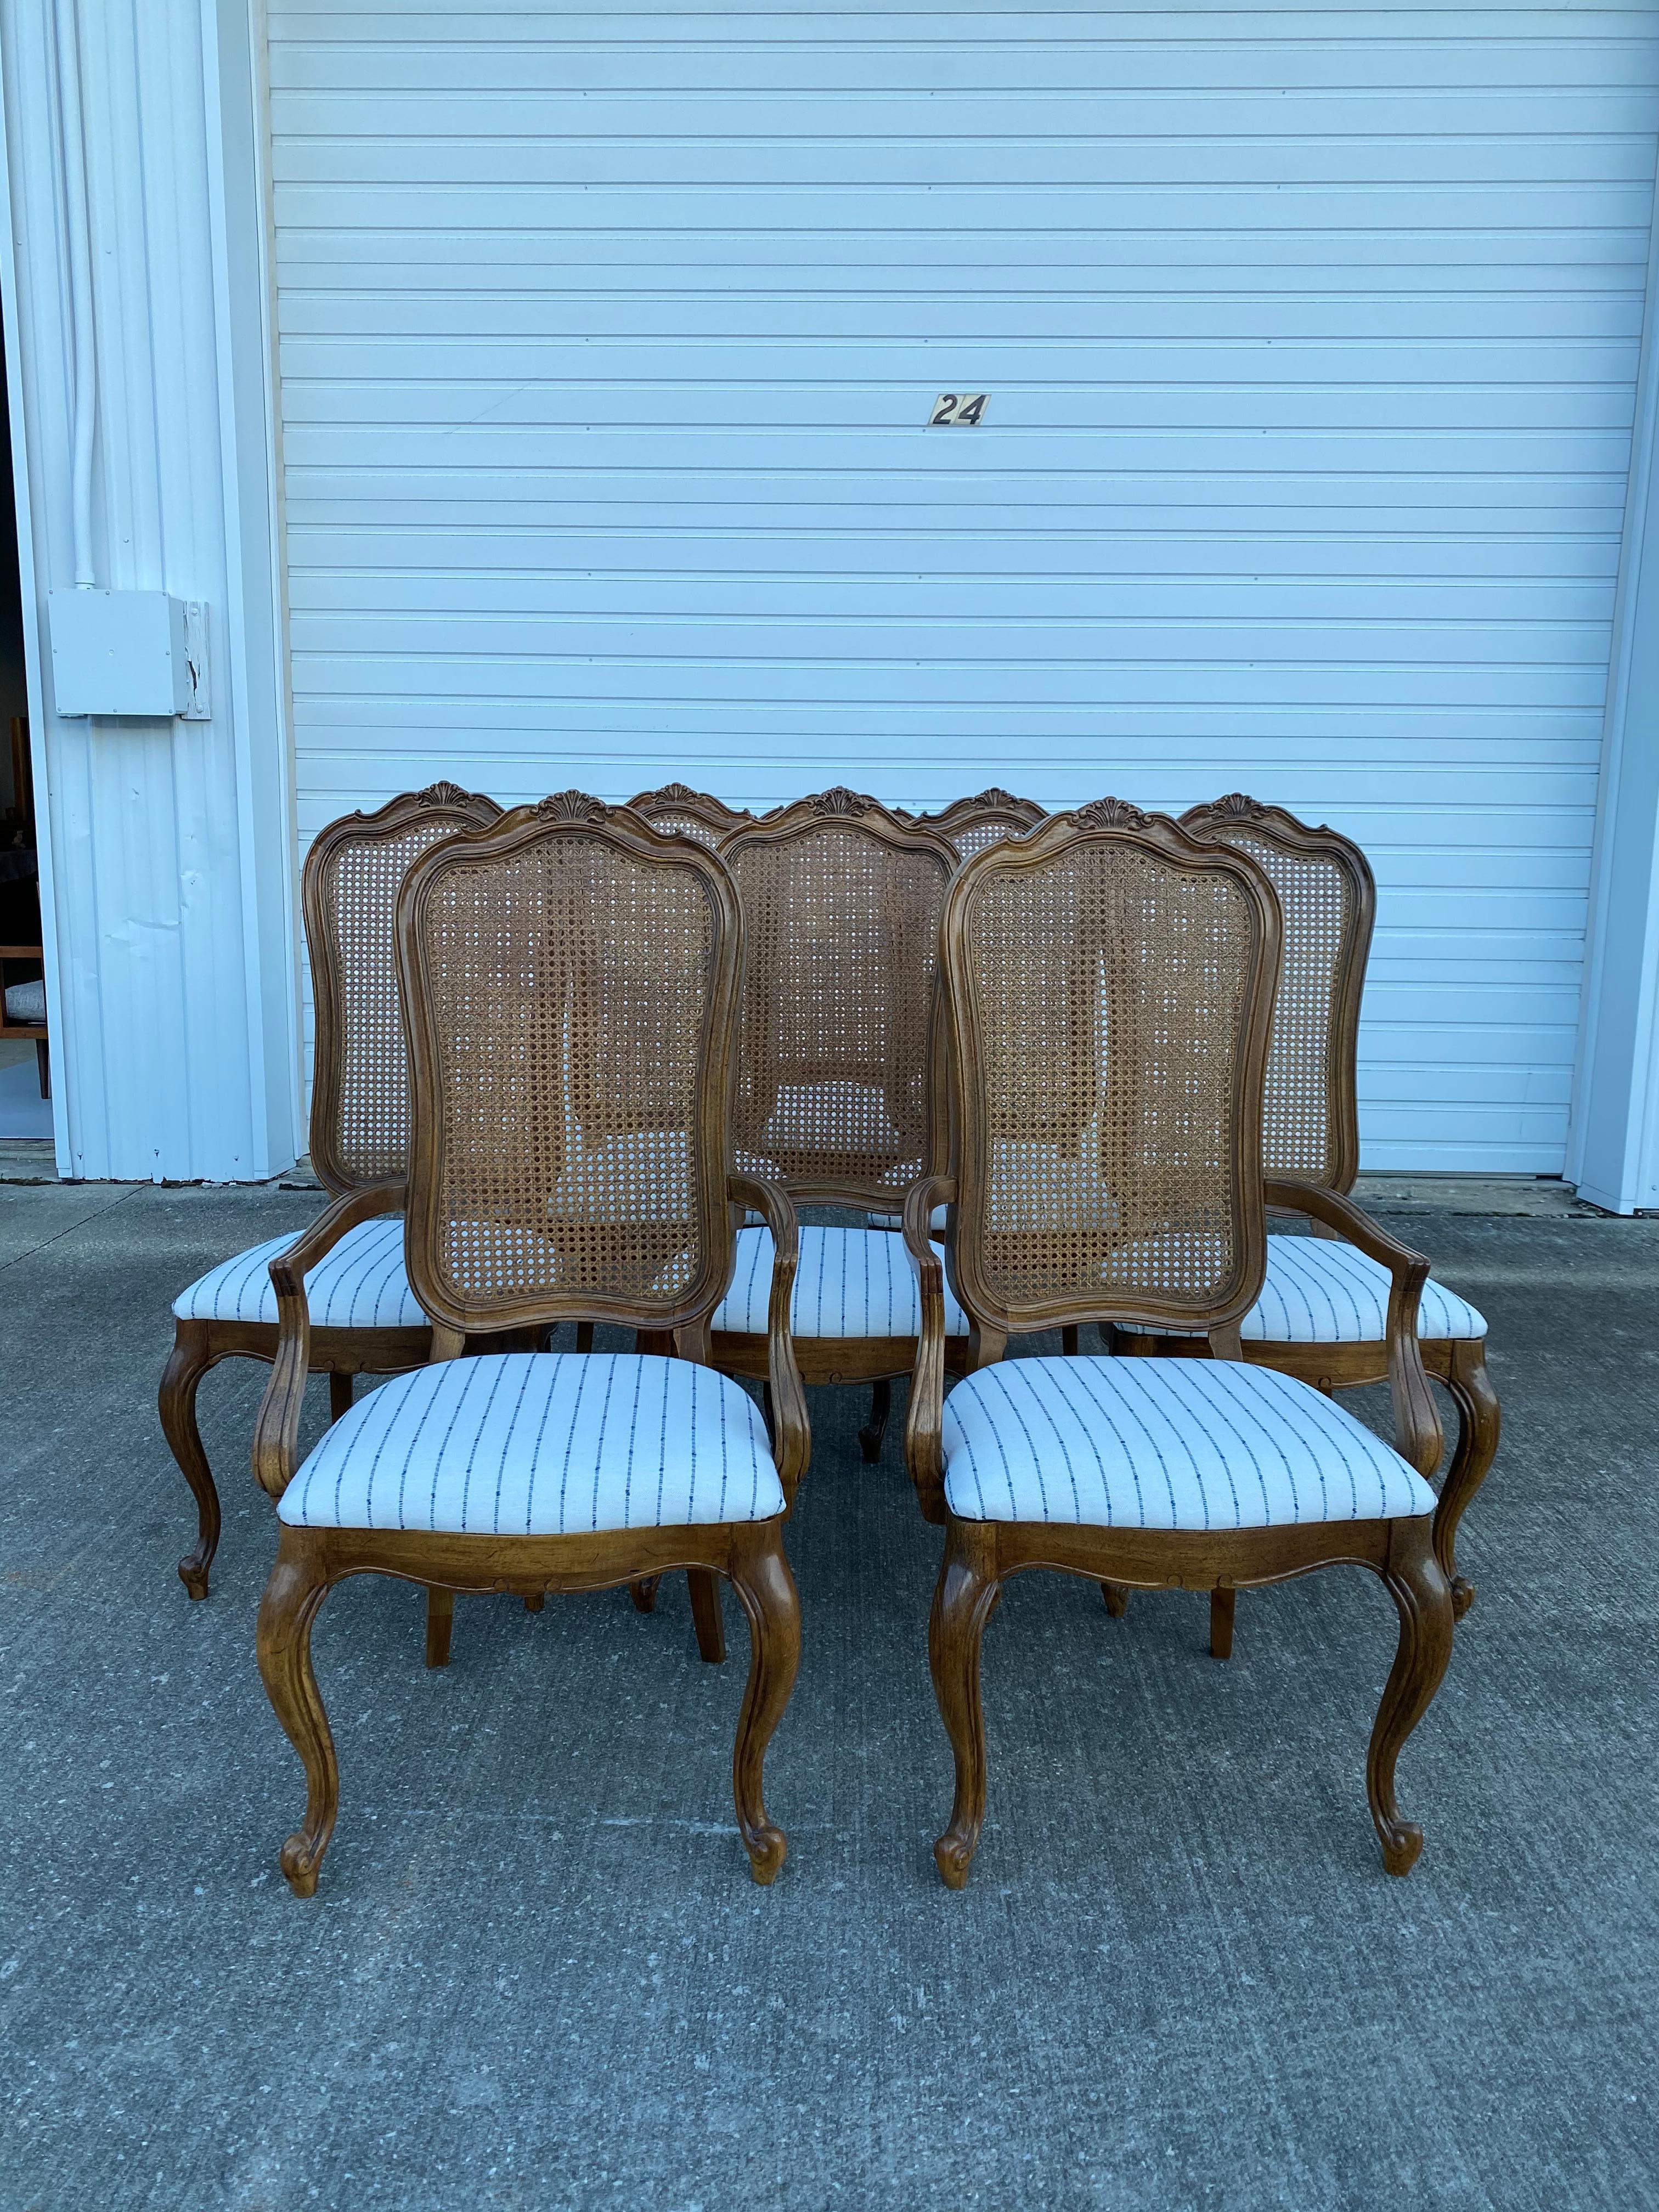 Set of 8 Thomasville French Provincial Cane Back Dining Chairs. 2 armchairs and 6 side chairs included. These chairs are in excellent condition, no breaks in the cane and hardly any scratches or gauges in the wood. These chairs have been